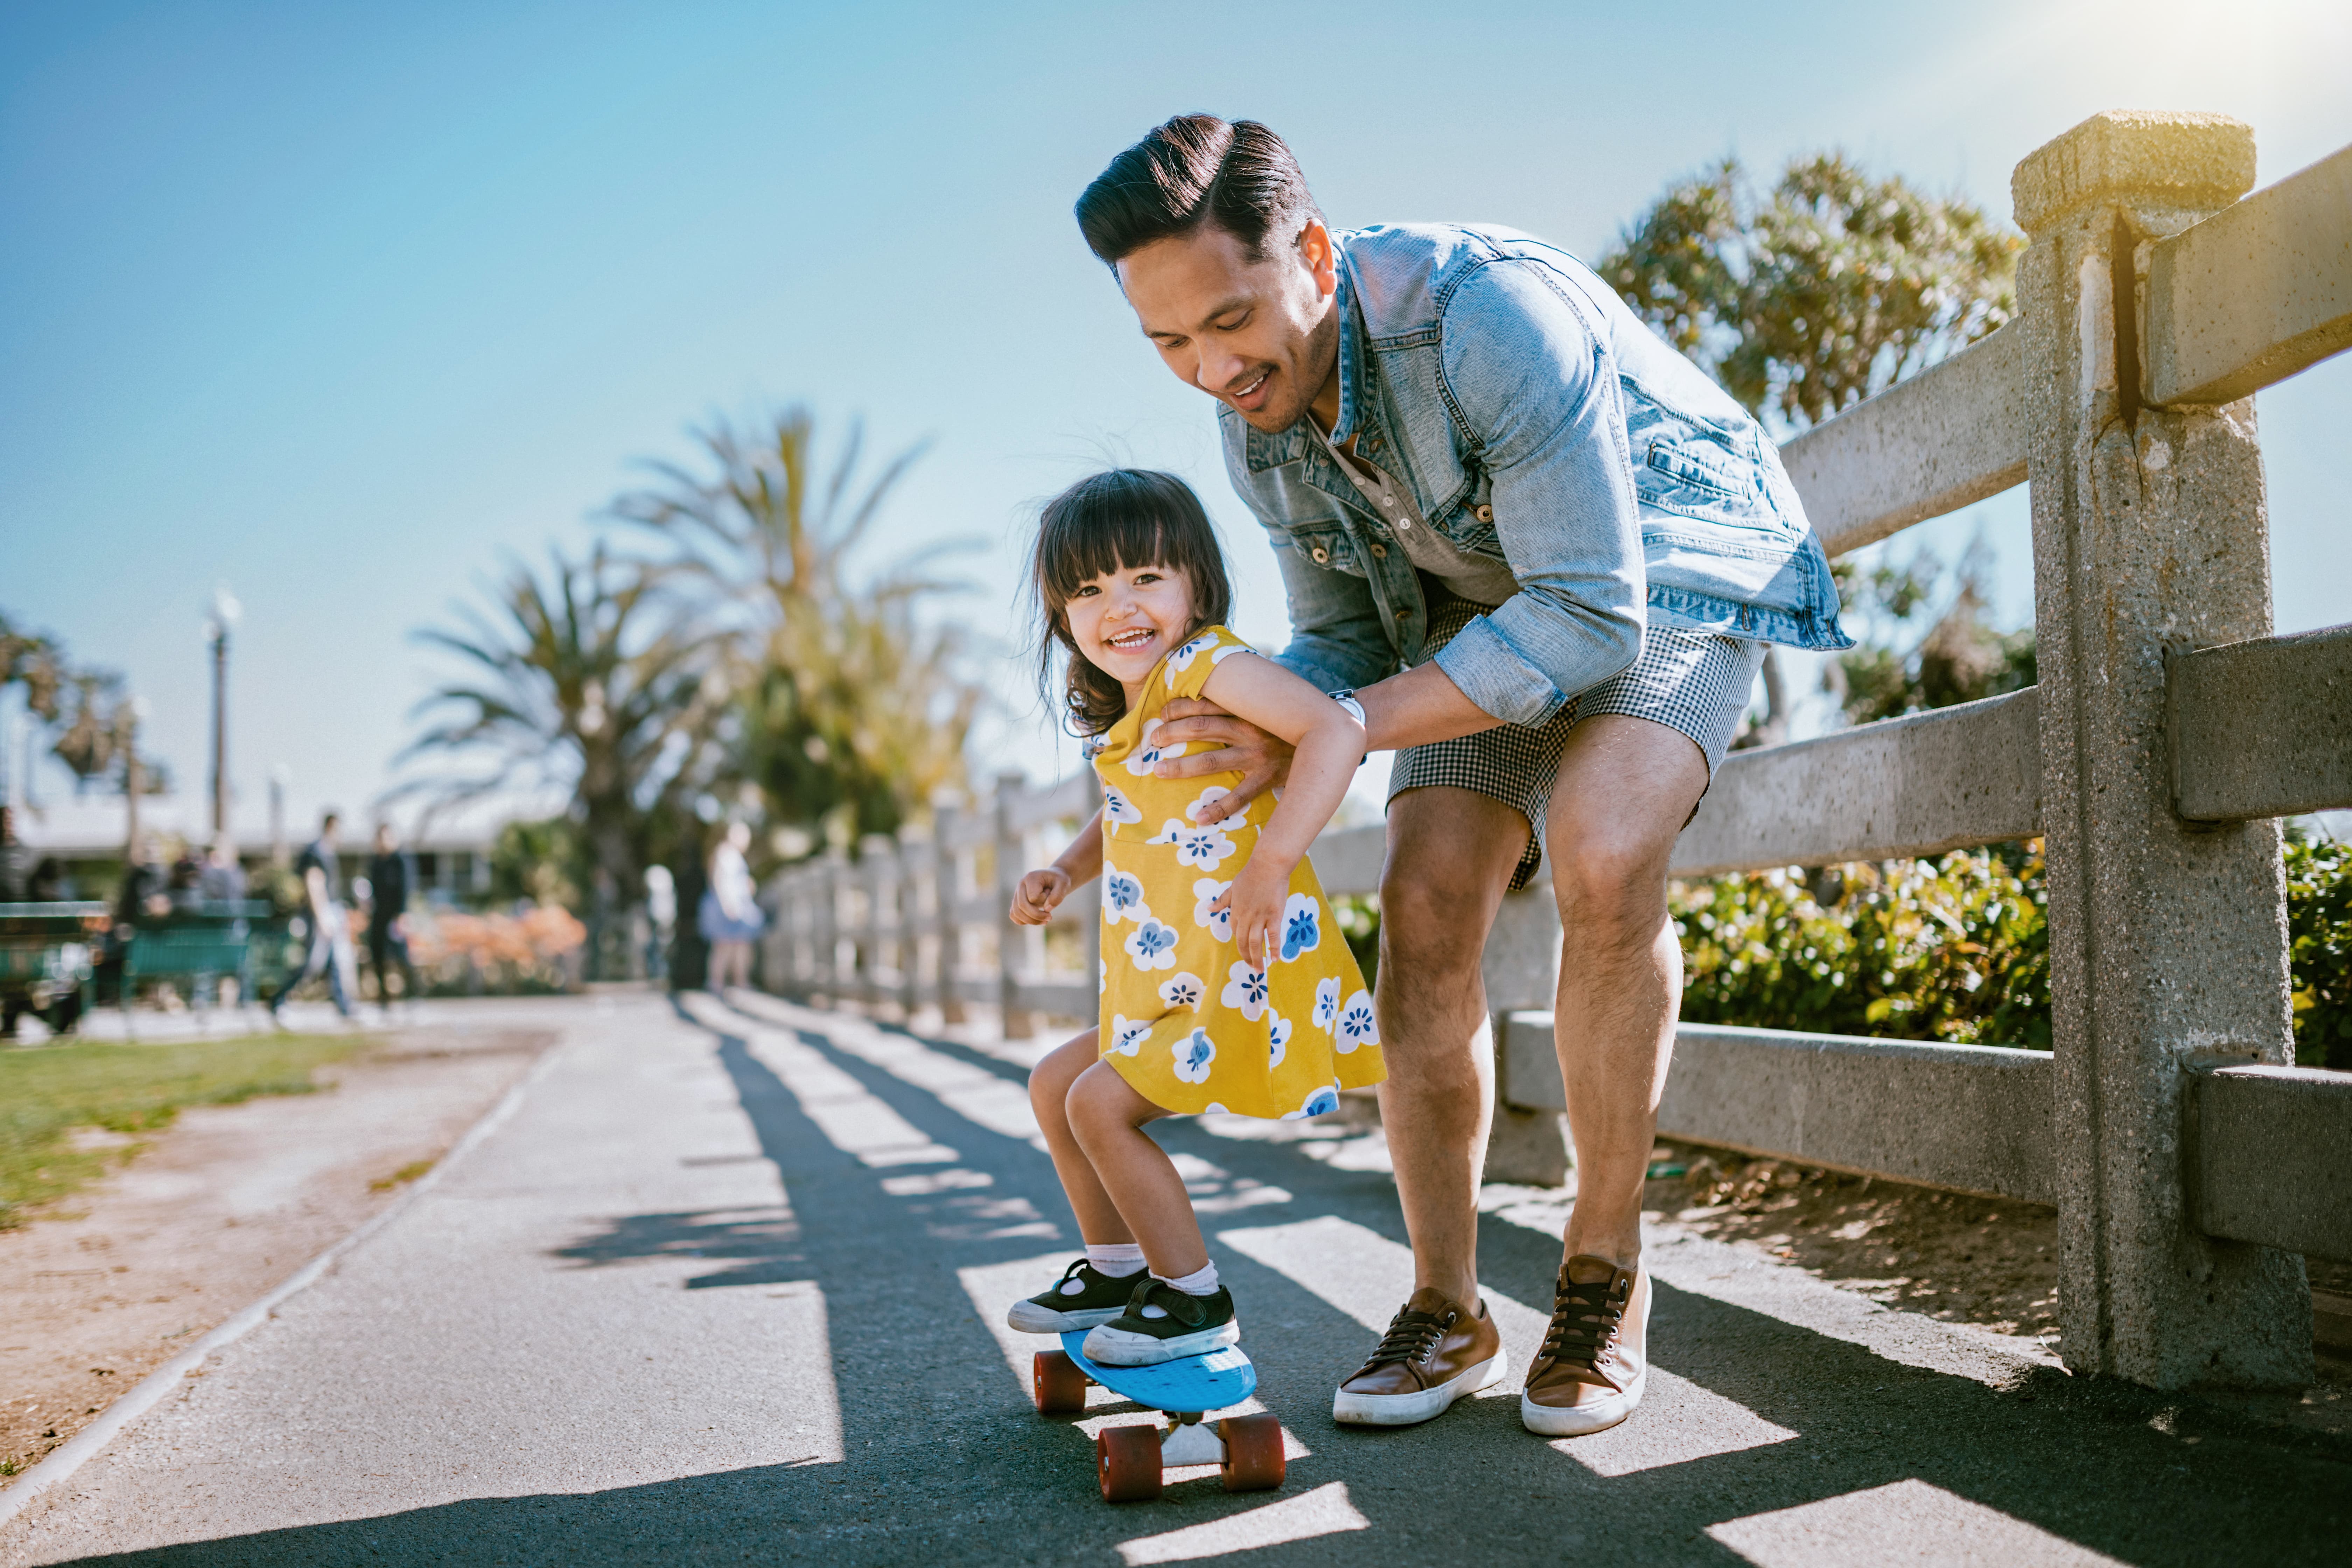 Father and daughter skateboarding.